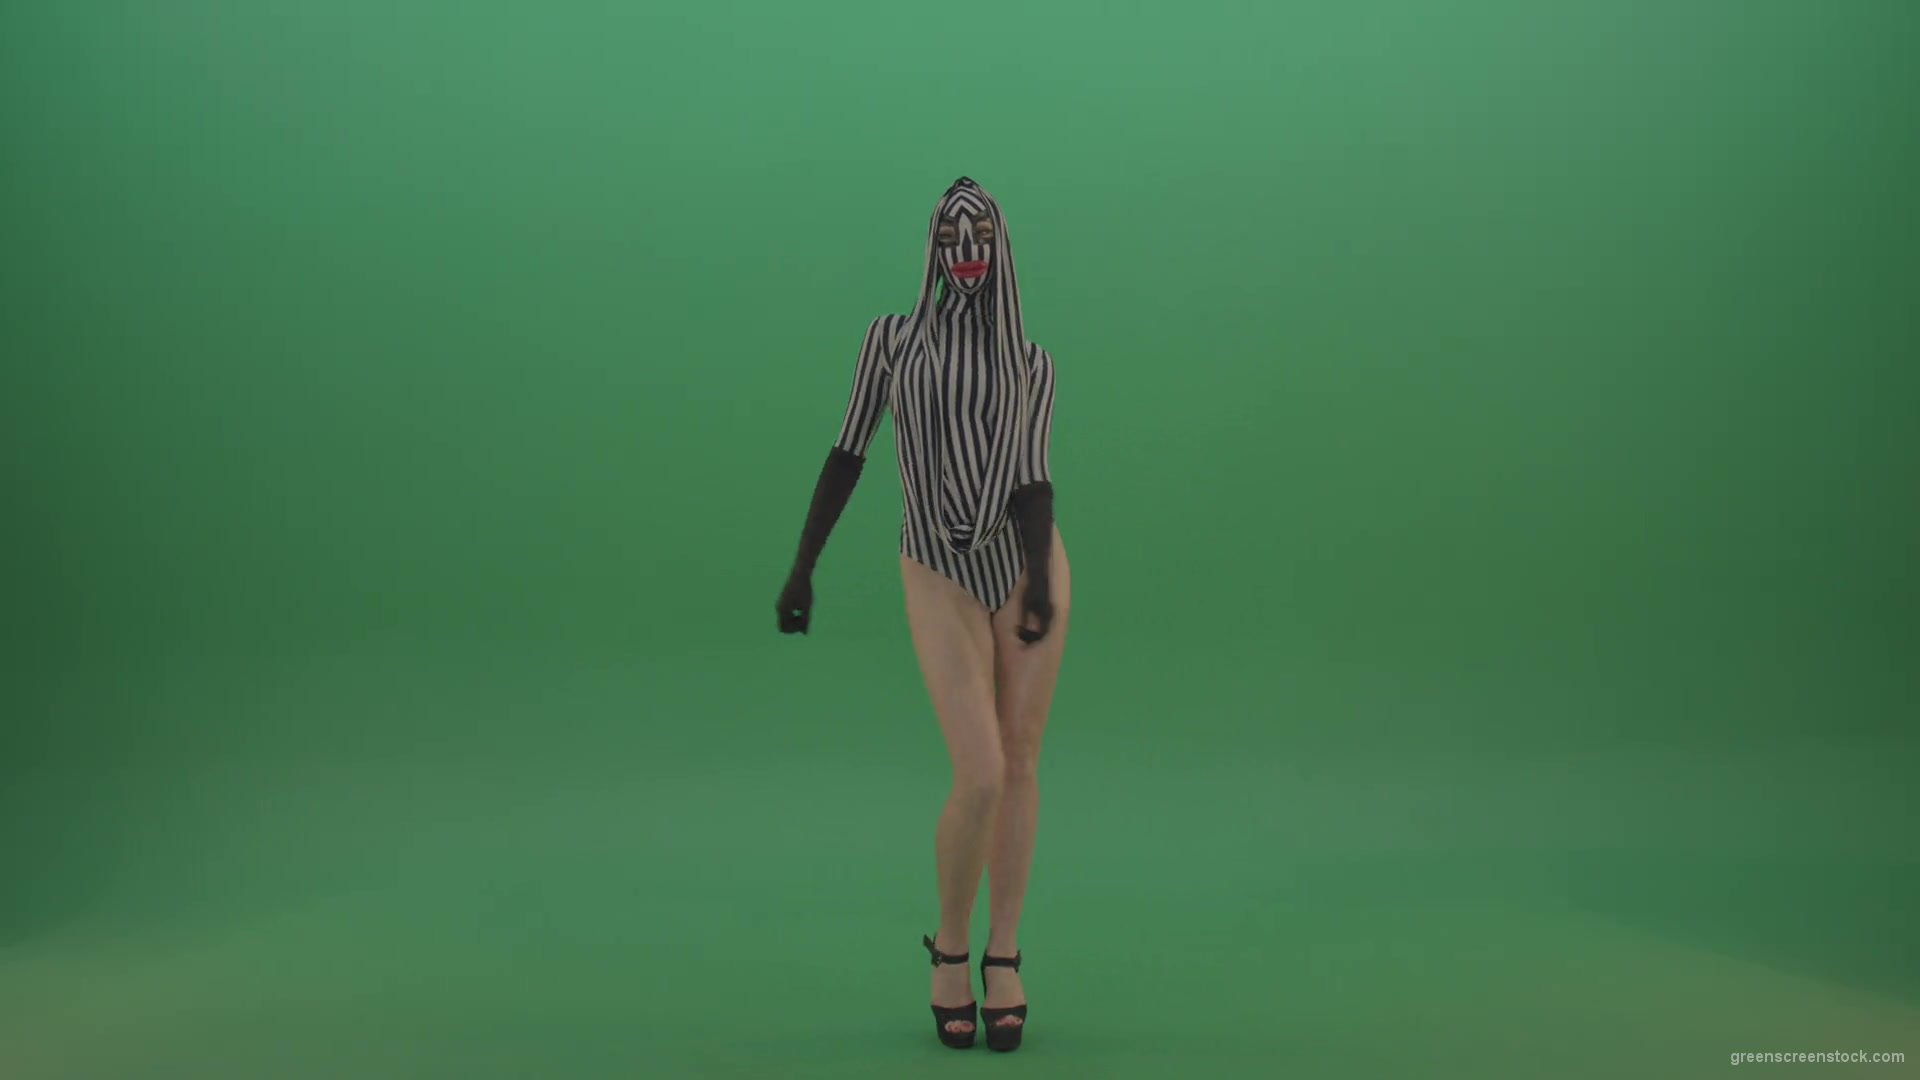 Long-legs-girl-march-in-white-black-stripe-costume-and-mask-on-green-screen-1920_002 Green Screen Stock